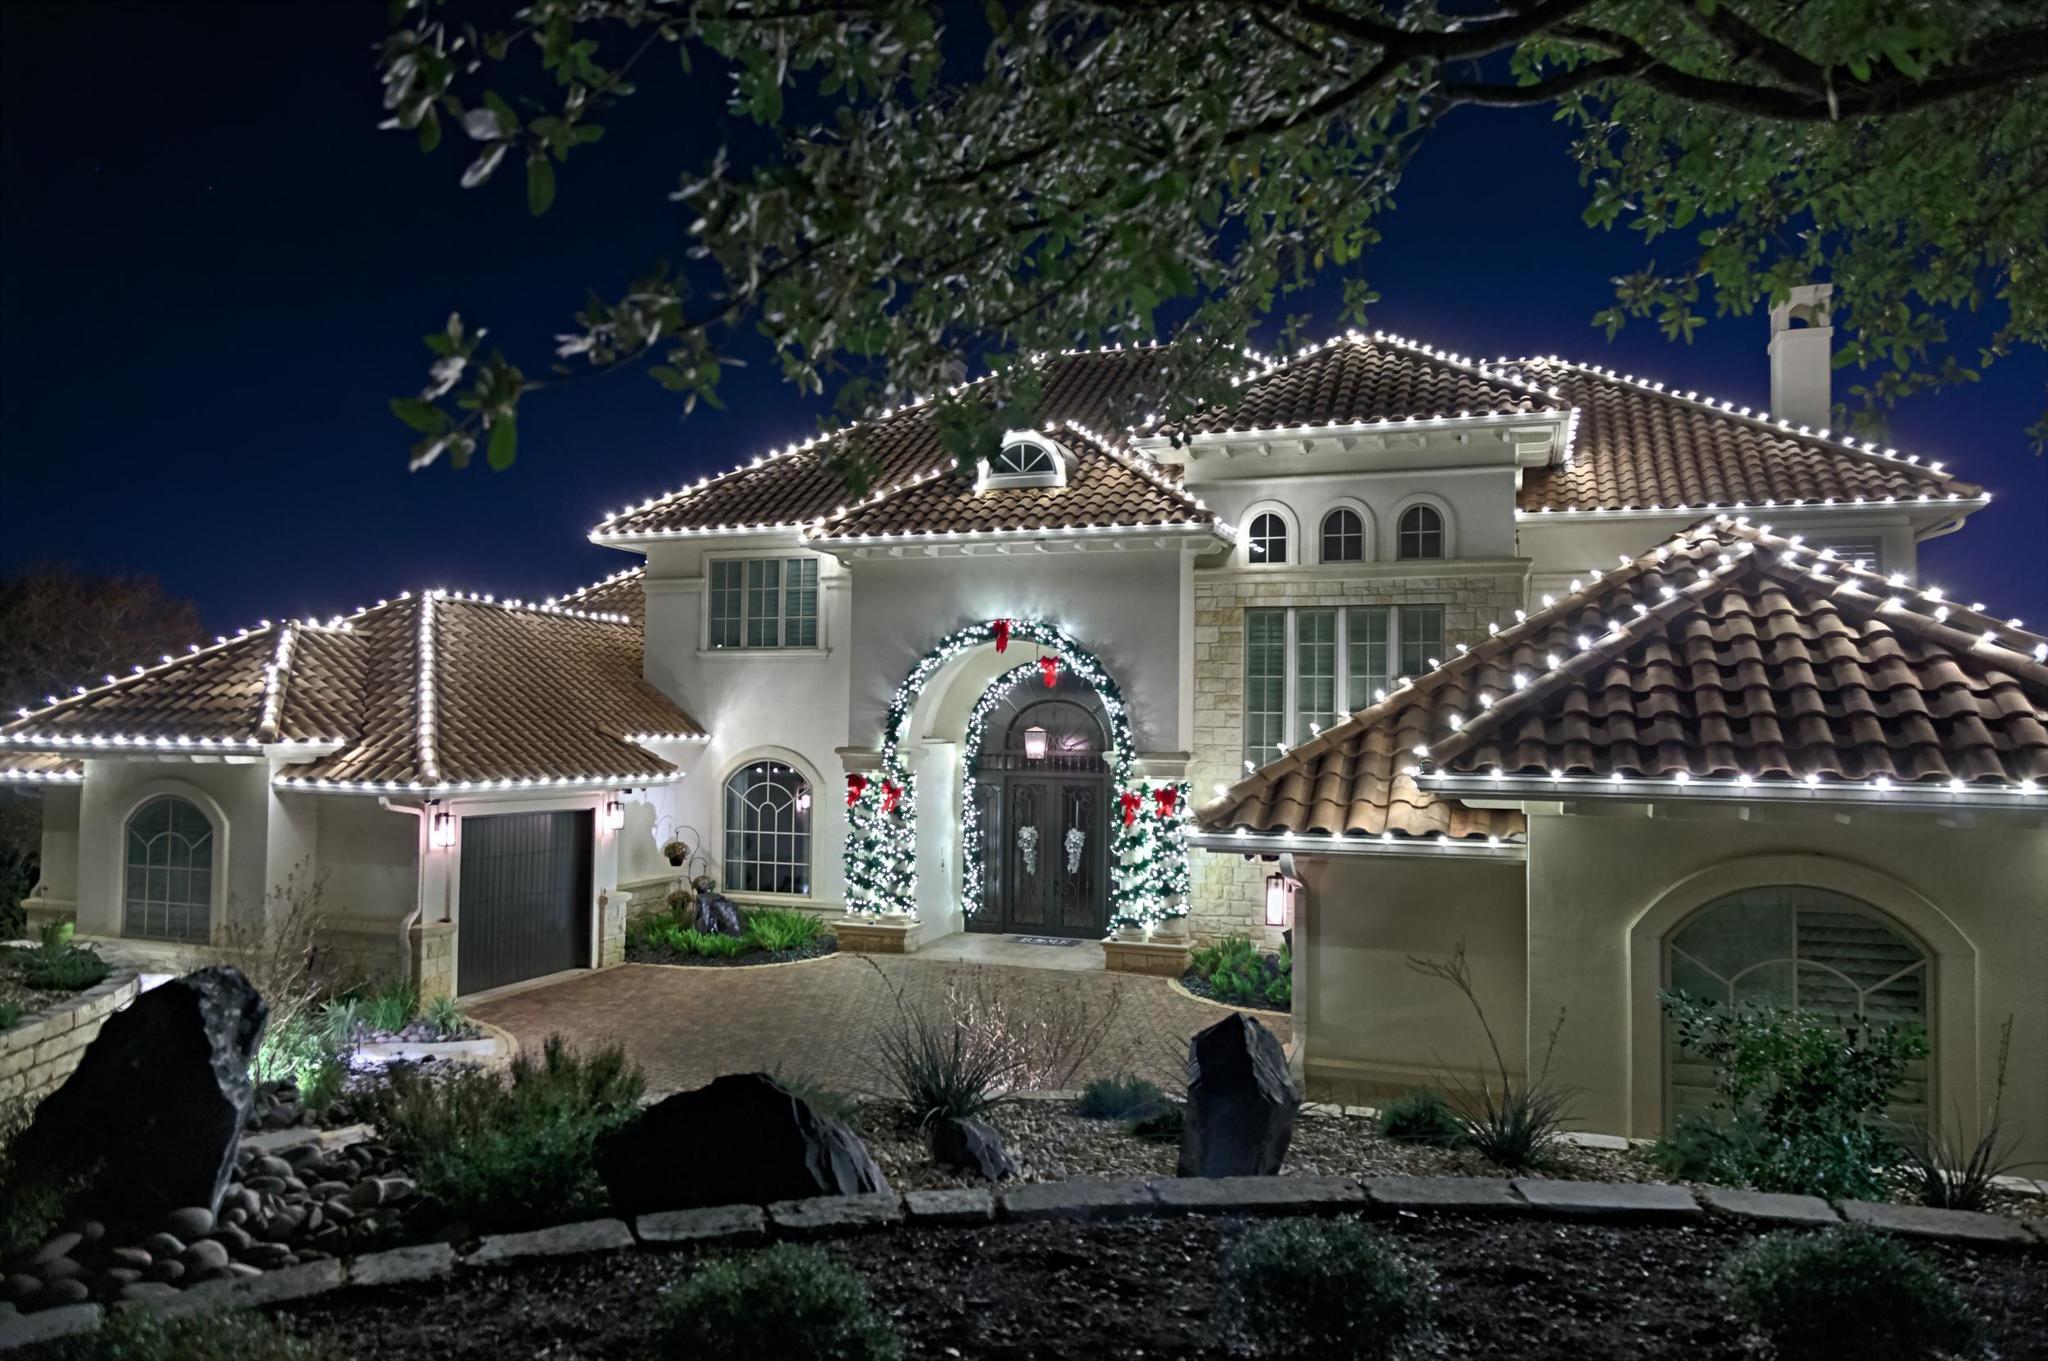 How To Hang Christmas Lights On Tile Roofs 9 Tips For A Successful Diy